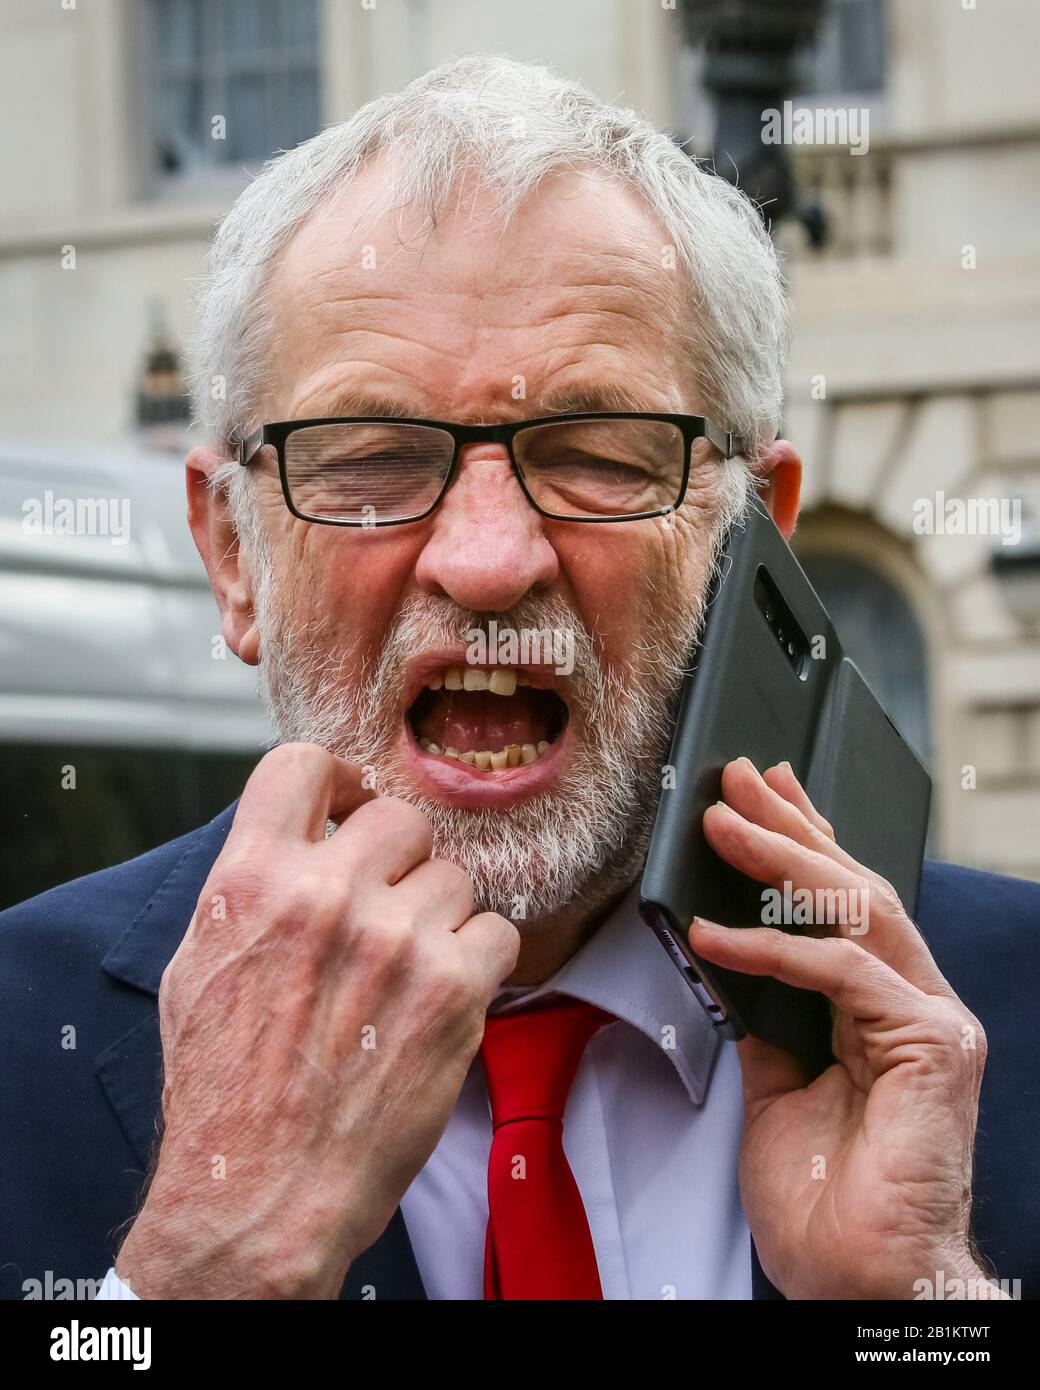 Westminster, London, UK. 26th Feb, 2020. Jeremy Corbyn, pulling a funny face whilst on the phone. Labour Leader Jeremy Corbyn, as well as John Mc Donnell, Dawn Butler, and Labour Chairman Ian Lavery and others speak at a protest organised by the PCS (Public and Commercial Services Union) supporting striking Interserve Workers. Outsourced facilities management workers at the Foreign and Commonwealth Office (FCO) in London began their strike period in November, because Interserve are not willing to recognise PCS. Credit: Imageplotter/Alamy Live News Stock Photo